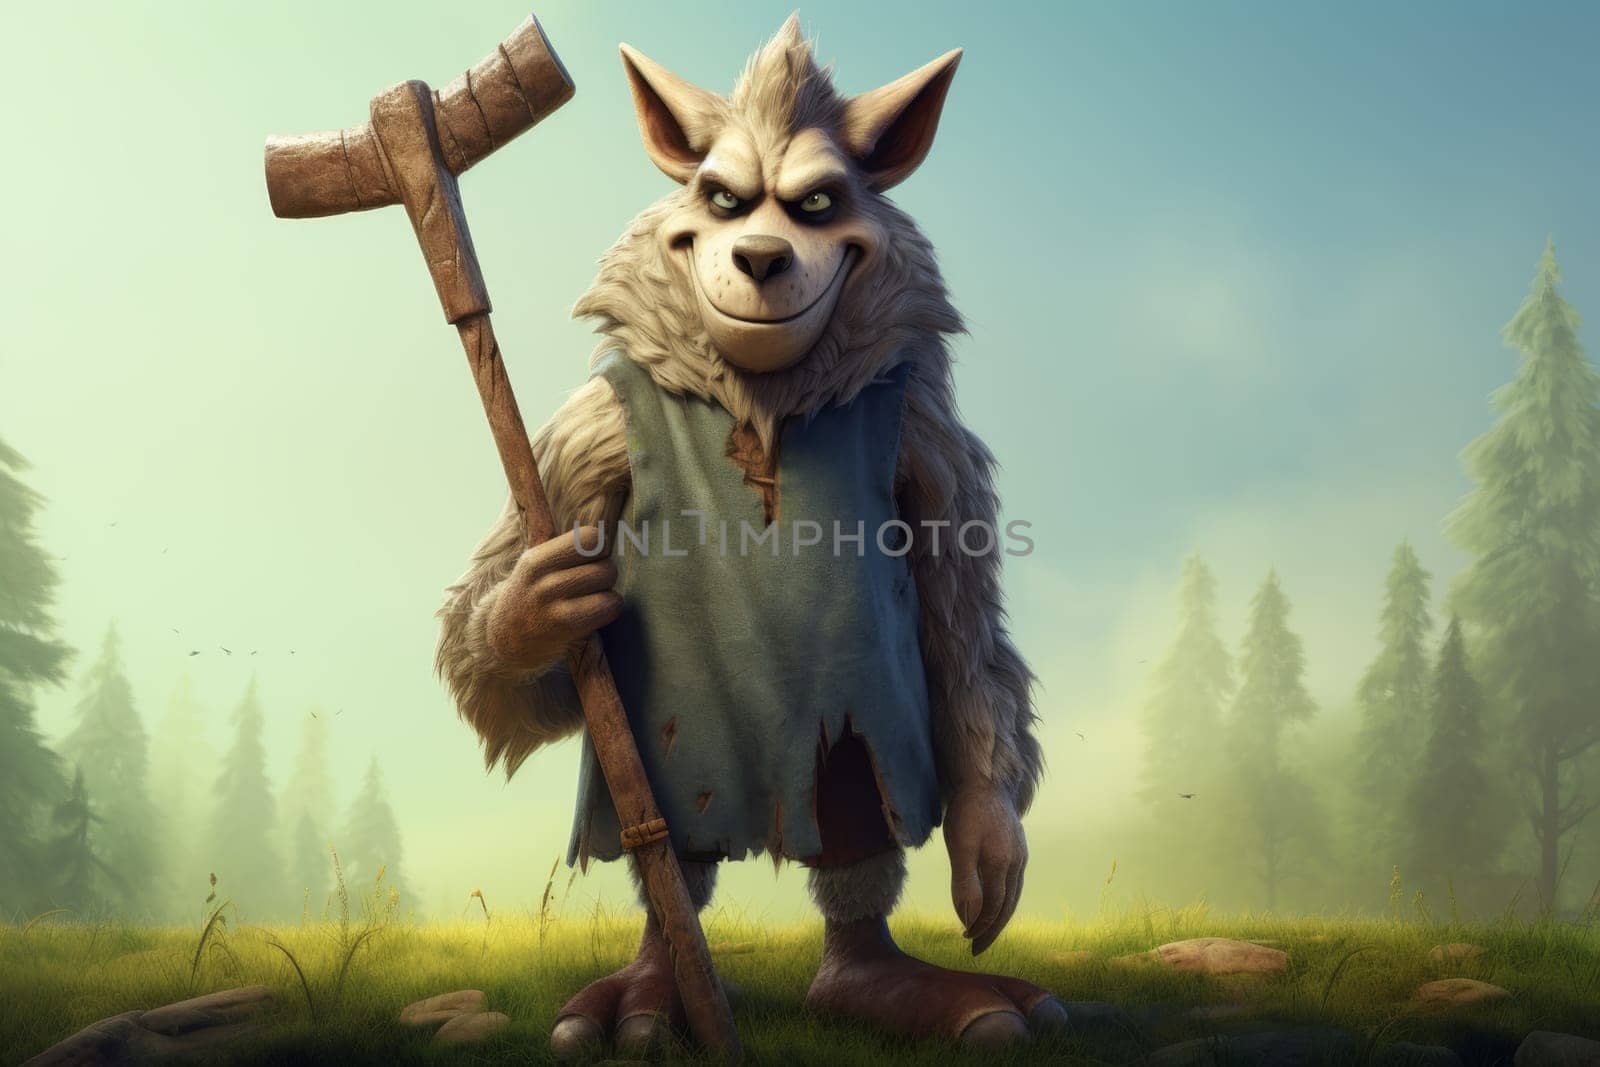 A cartoon character of a lumberjack wolf with an axe in his hands. 3d illustration by Lobachad